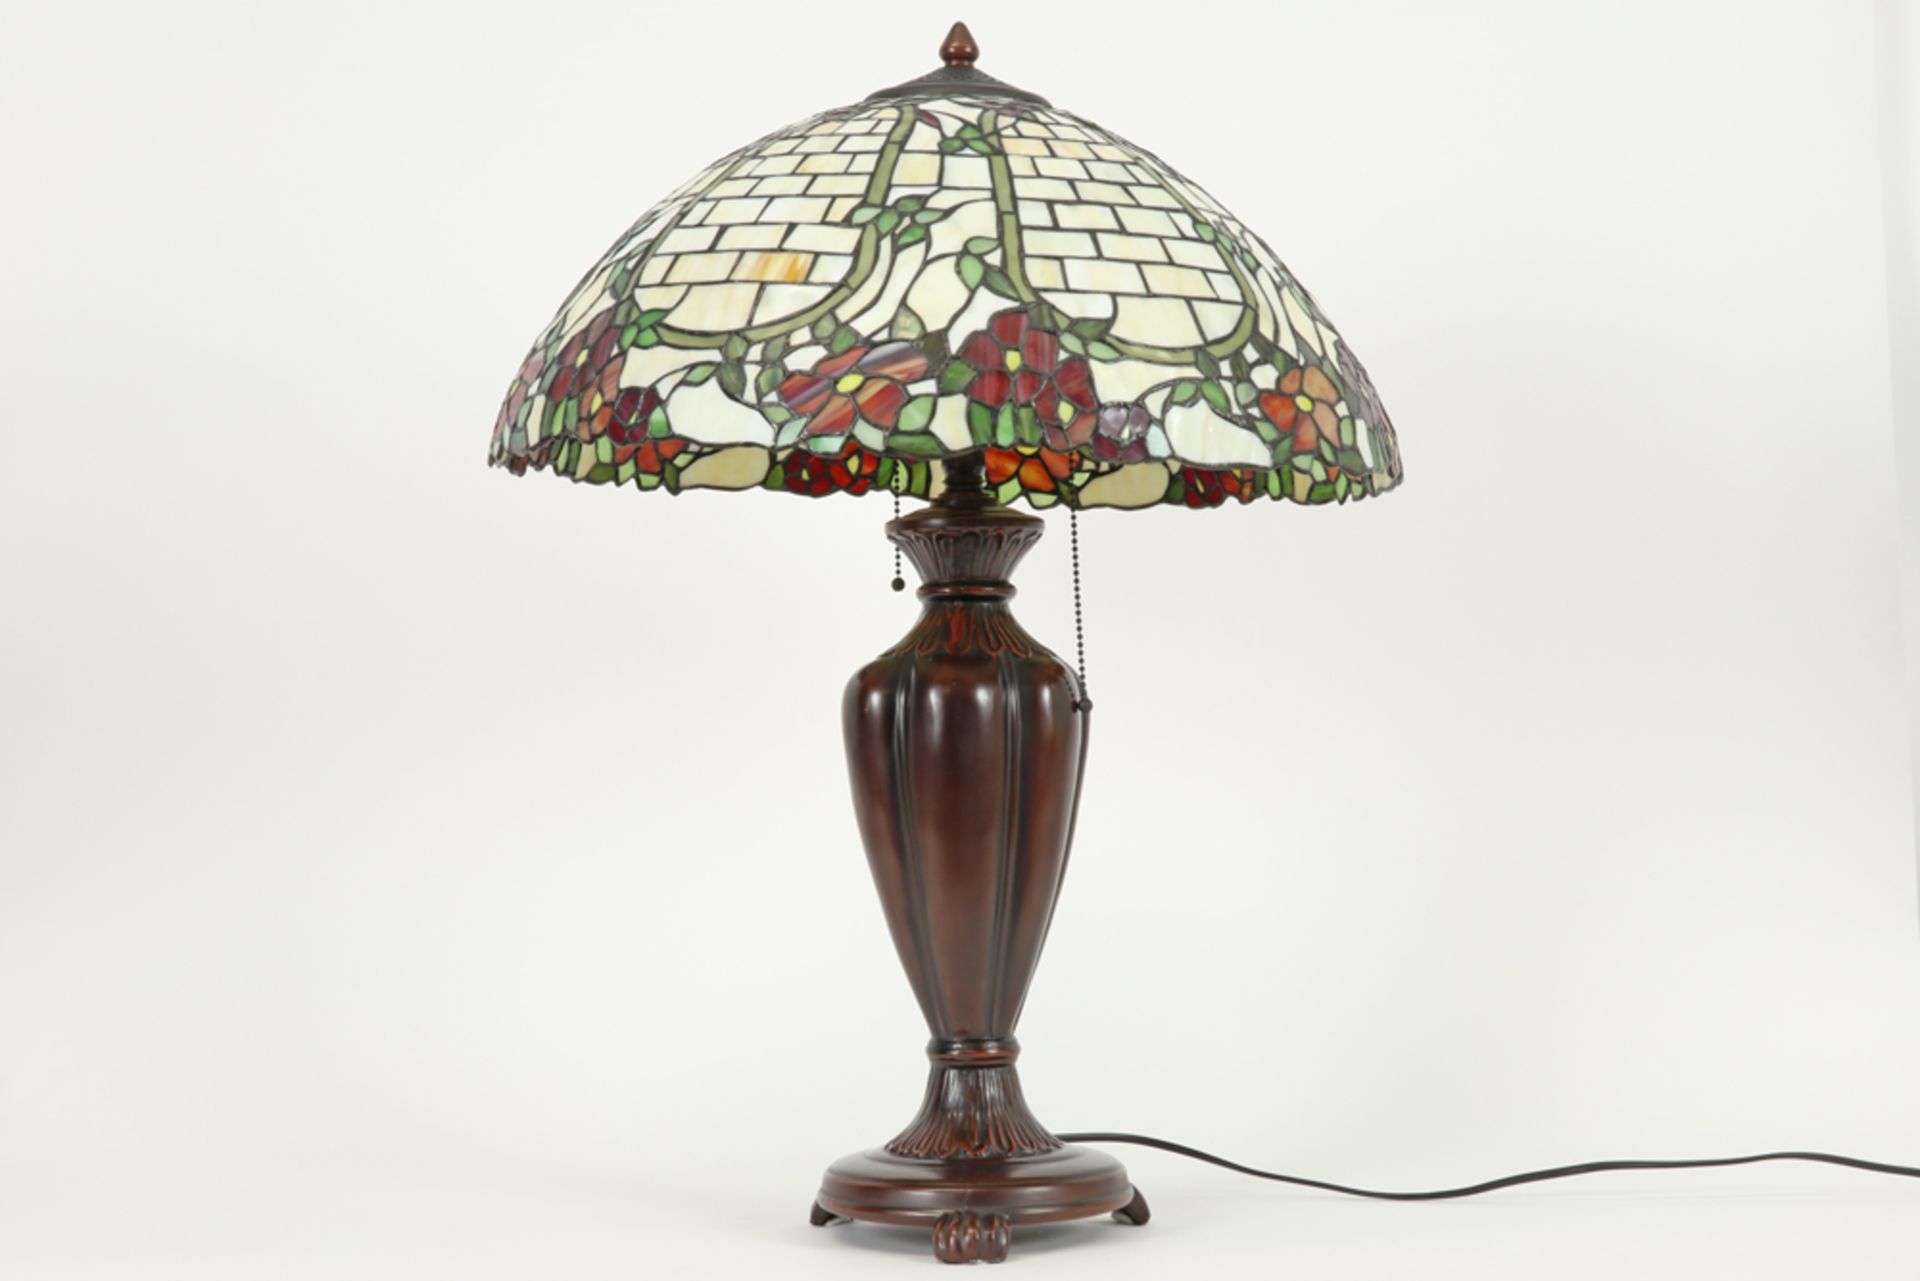 Tiffany style lamp with base in bronze and shade in glass-in-lead||Lamp in Tiffany-stijl met bronzen - Bild 2 aus 3